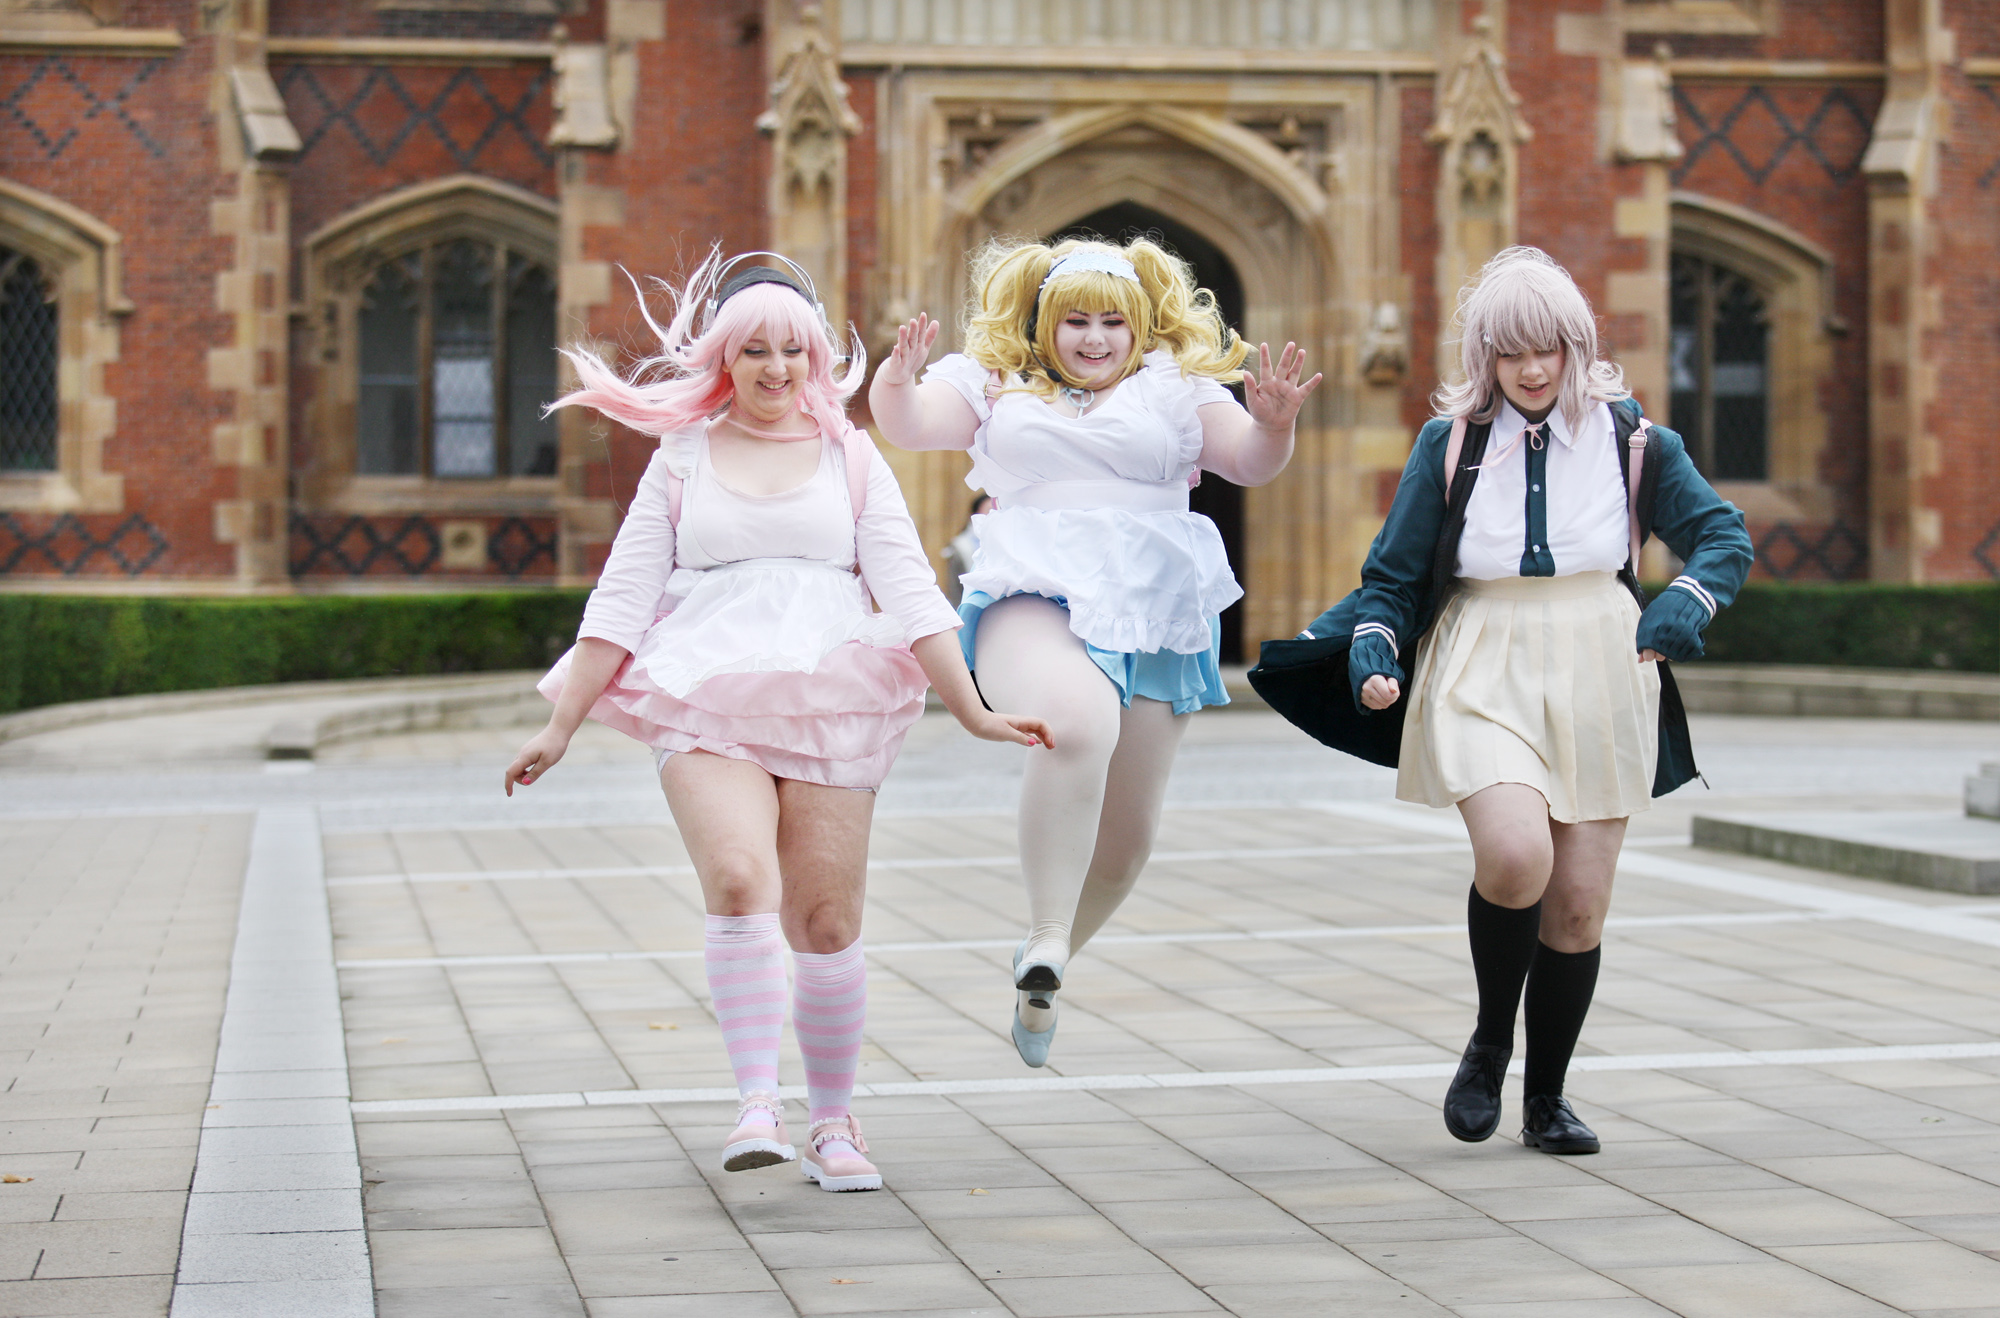 Fans of cult culture enjoyed a weekend of gaming and anime at Queens University as part of the Q-Con convention